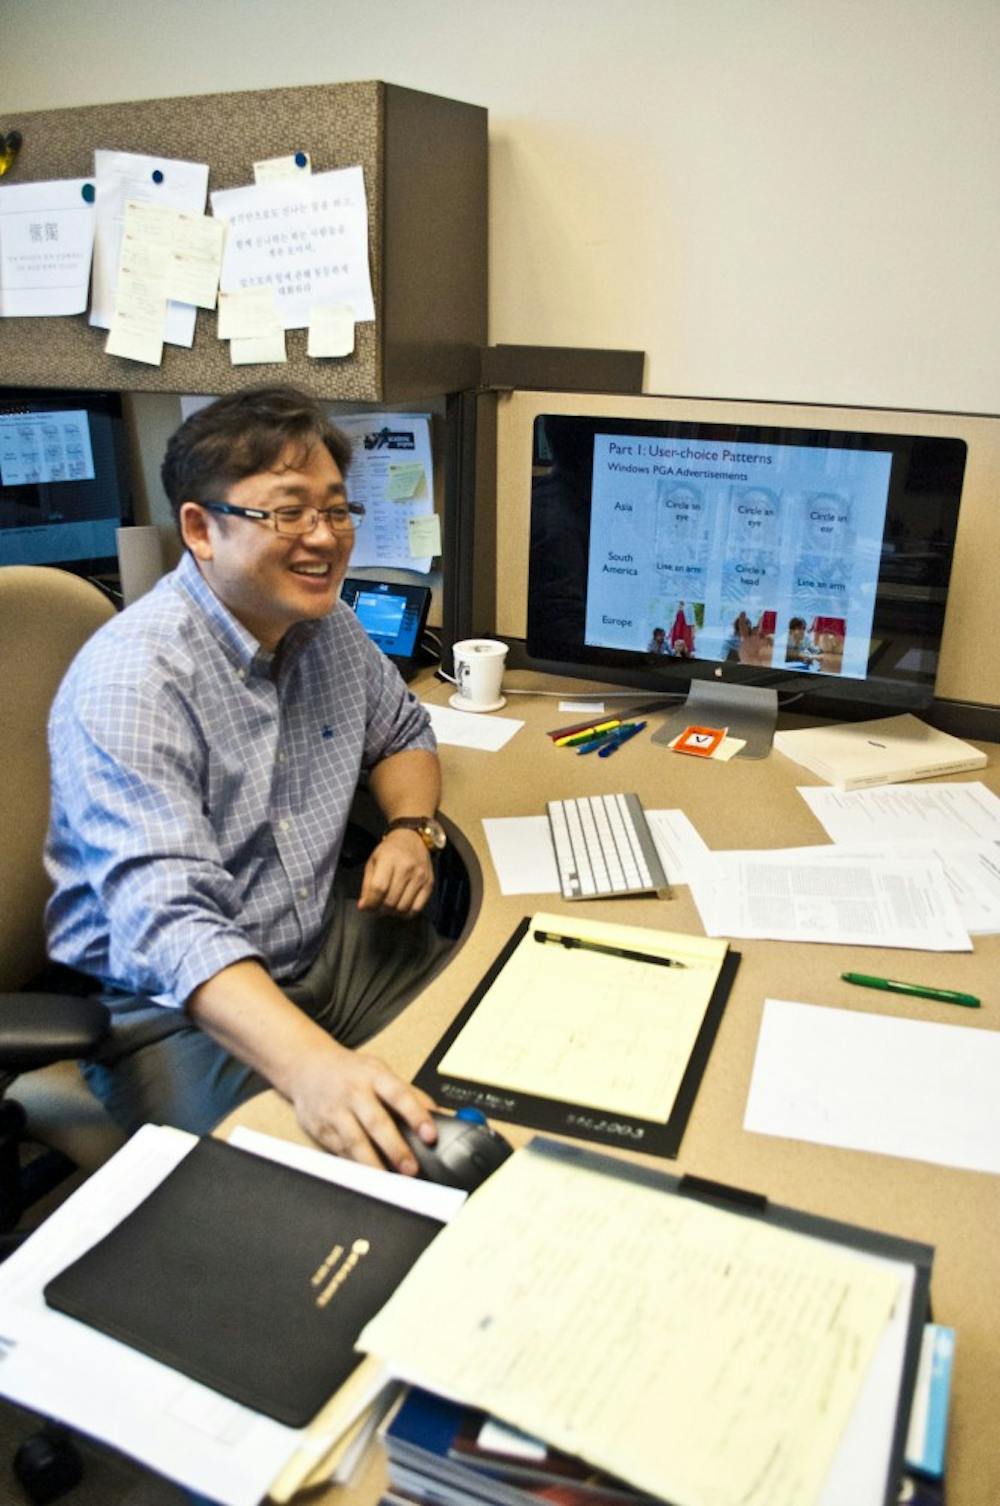 Gail-Joon Ann sits at his desk and explains his picture password project, a project he believes can make networks around ASU and the country safer. (photo by Katie Dunphy)